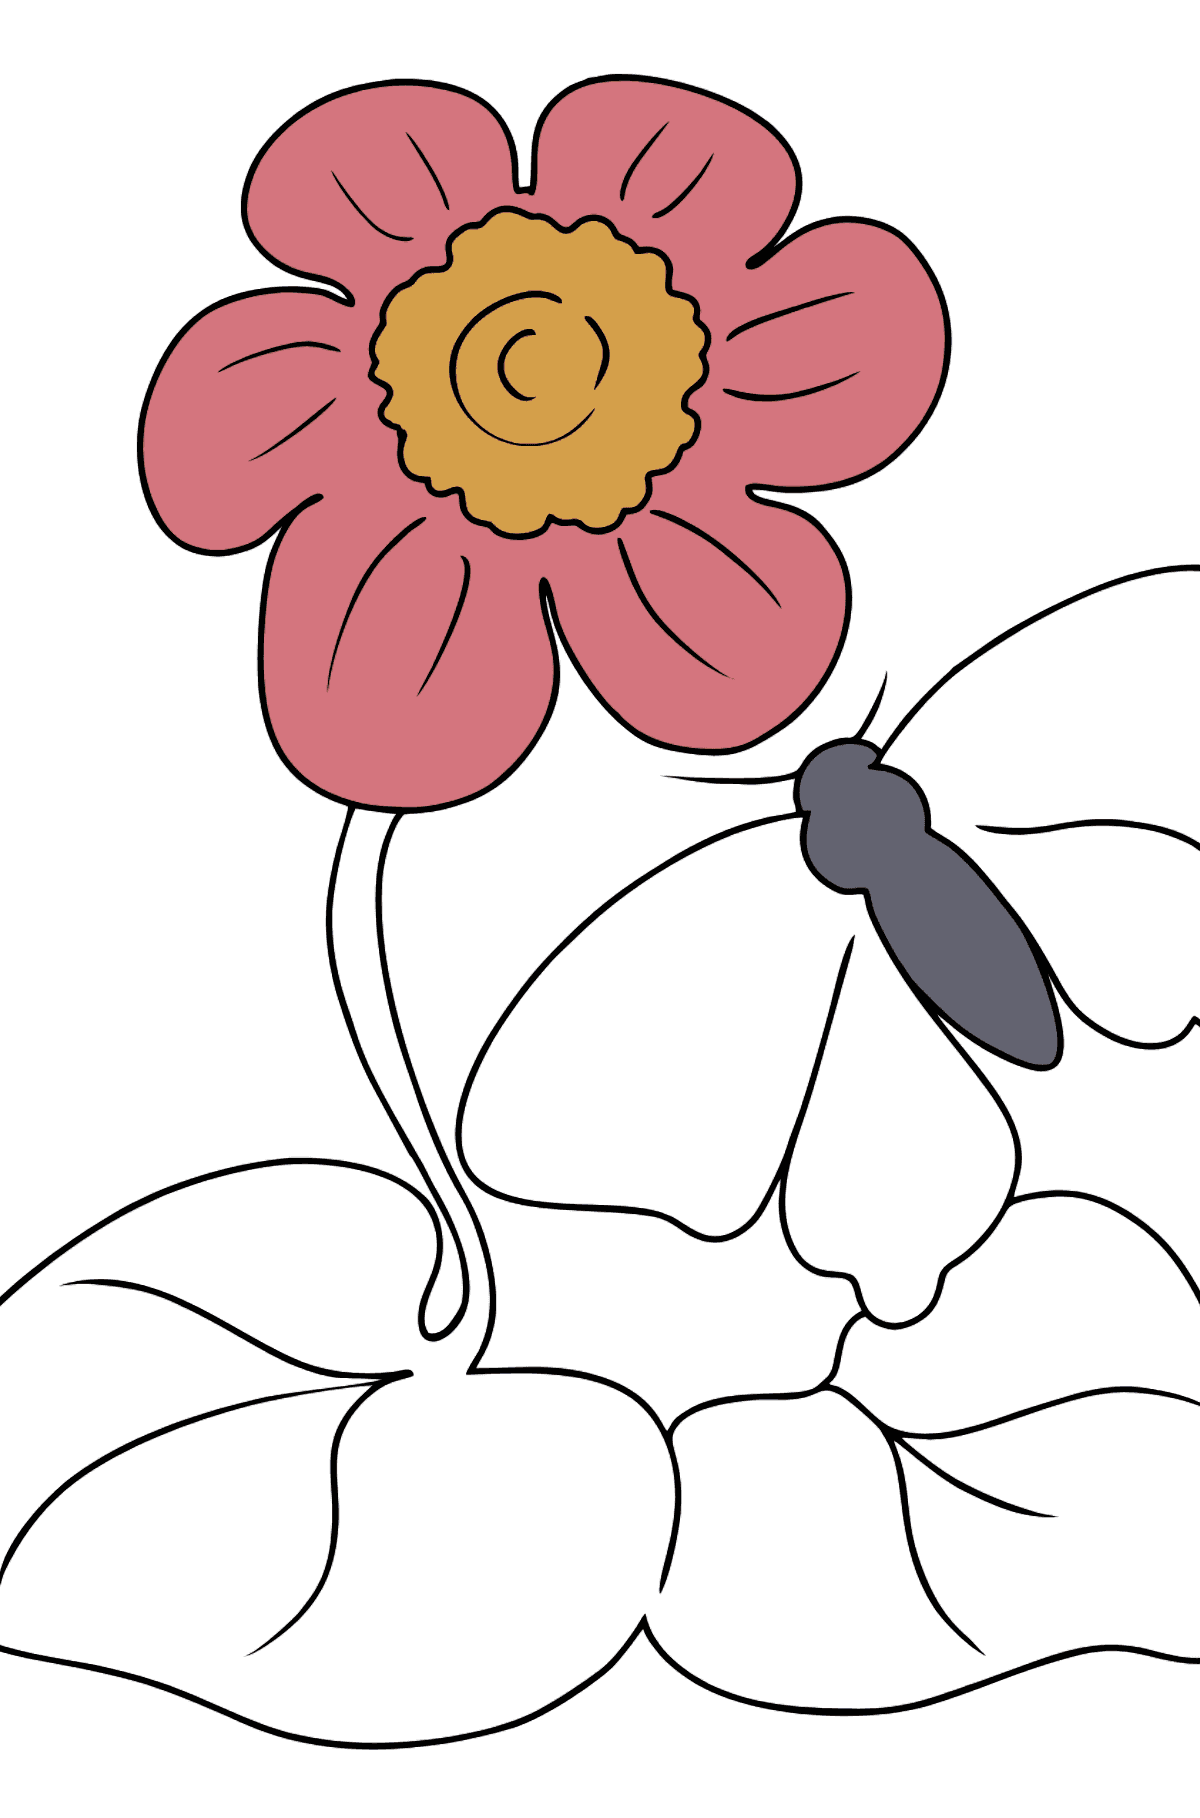 Coloring Page - flowers and butterfly - Coloring Pages for Kids